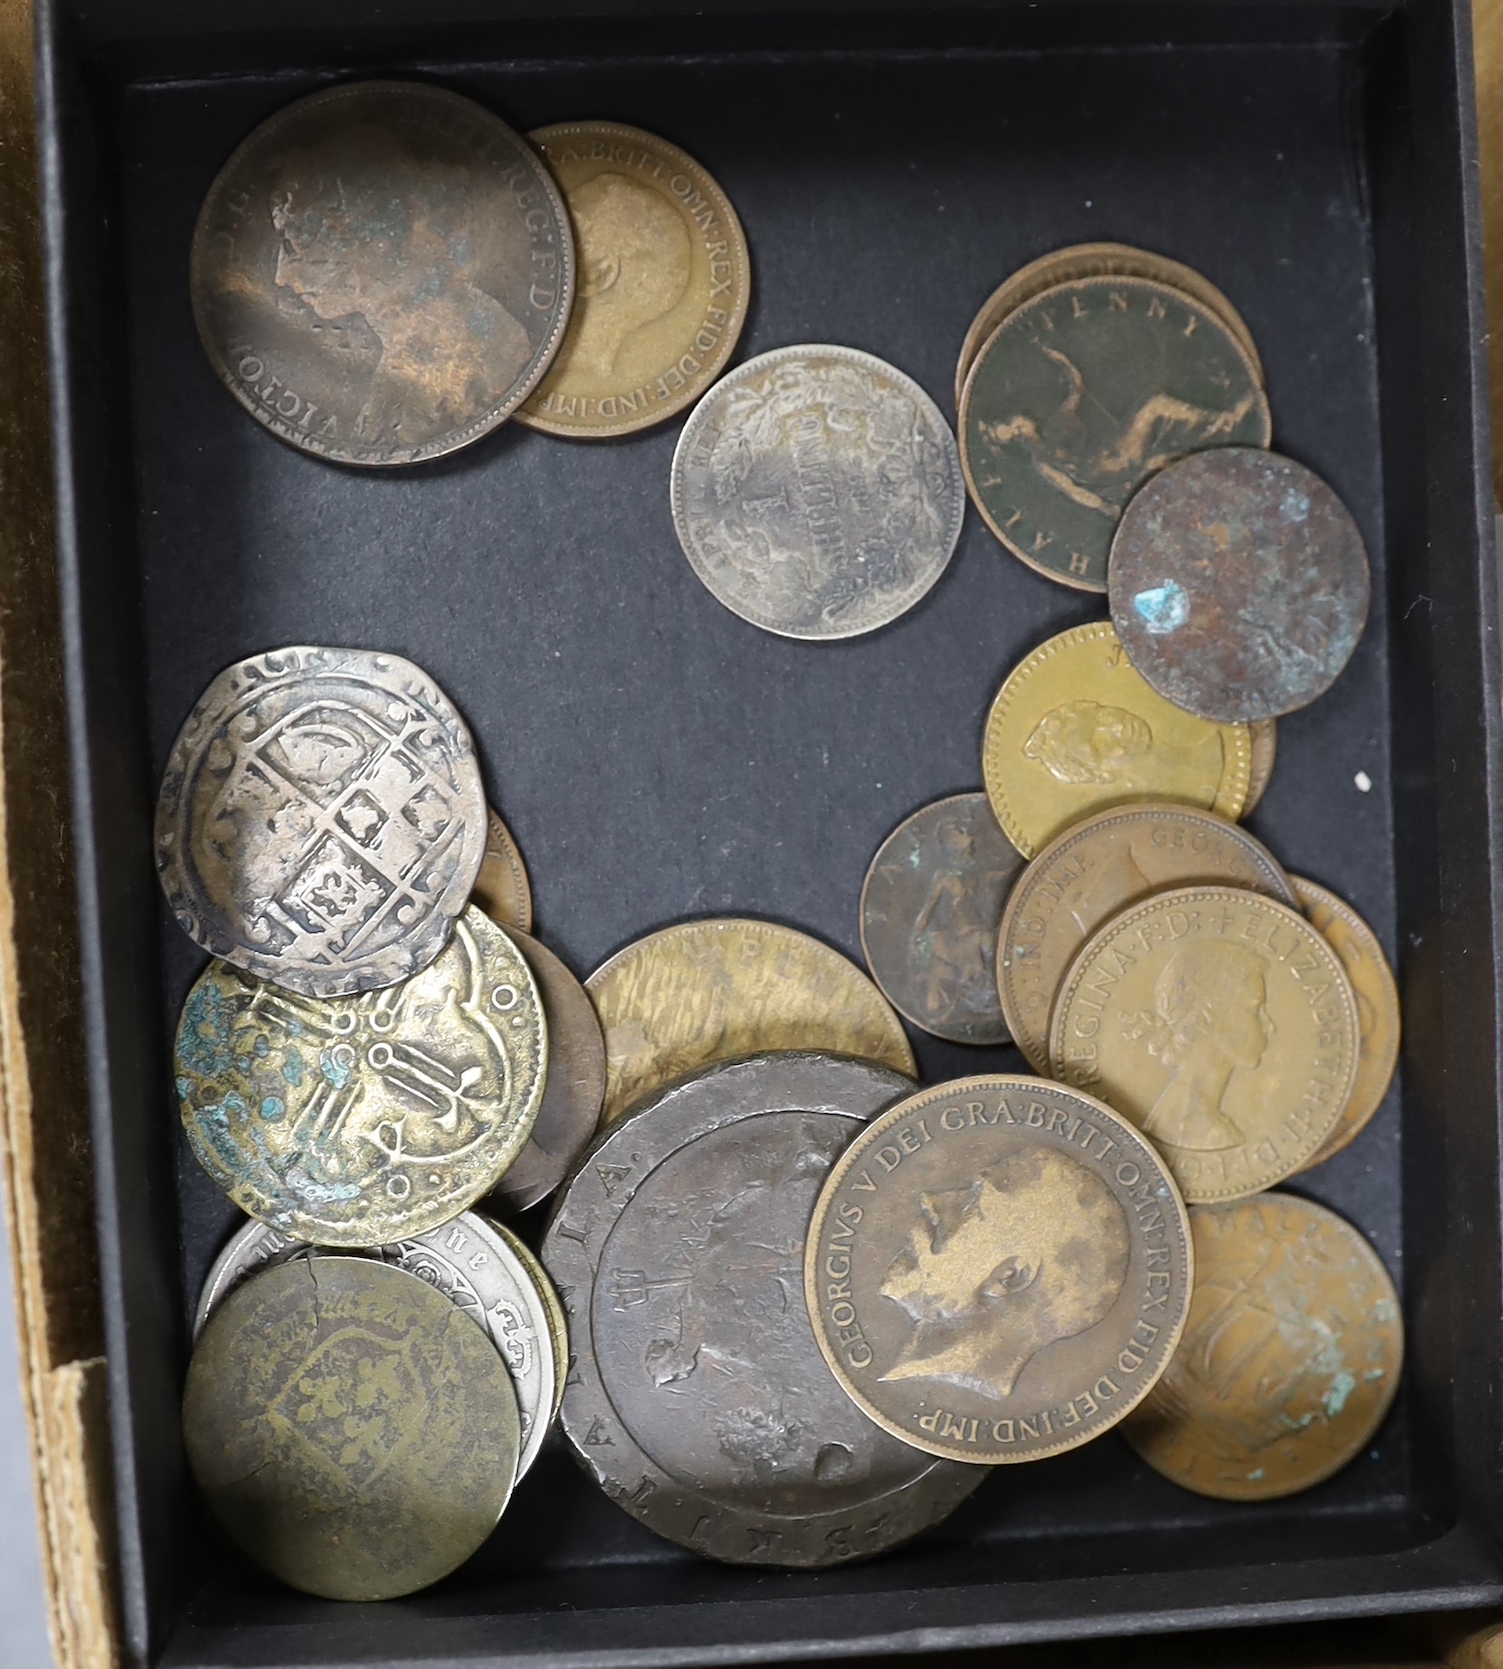 A collection of world coins including halfcrowns, florins, British coins, Charles II to QEII, highlights - 1875, 1888, 1874 and 1890 halfcrowns, Tees 1813 one penny token, James I shilling, 1886 Gothic florin, 1625 Farth